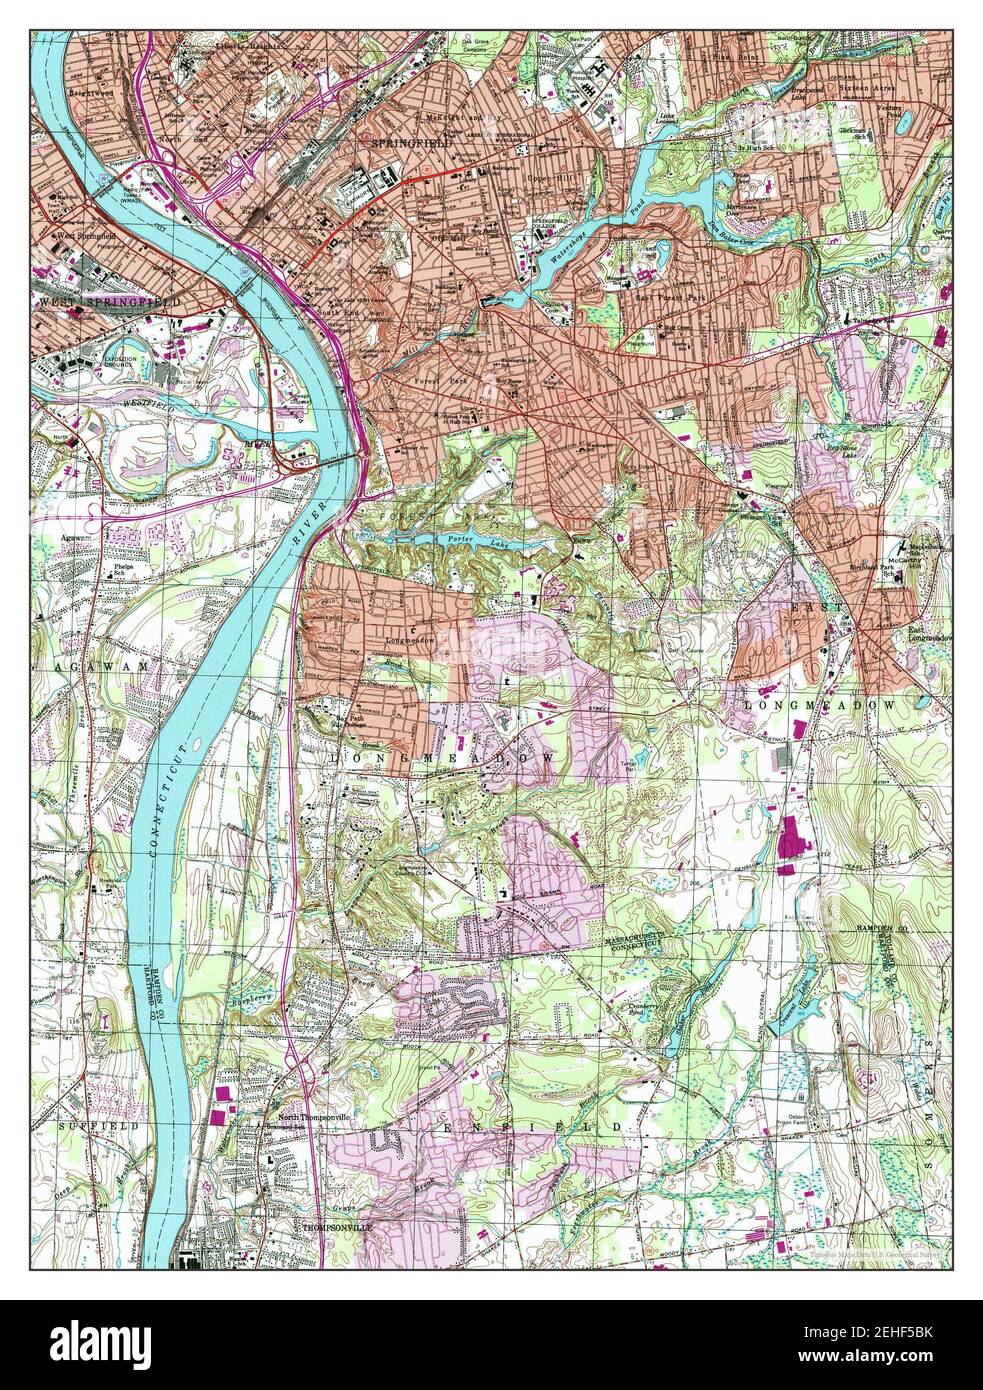 Springfield South, Massachusetts, map 1958, 1:25000, United States of America by Timeless Maps, data U.S. Geological Survey Stock Photo